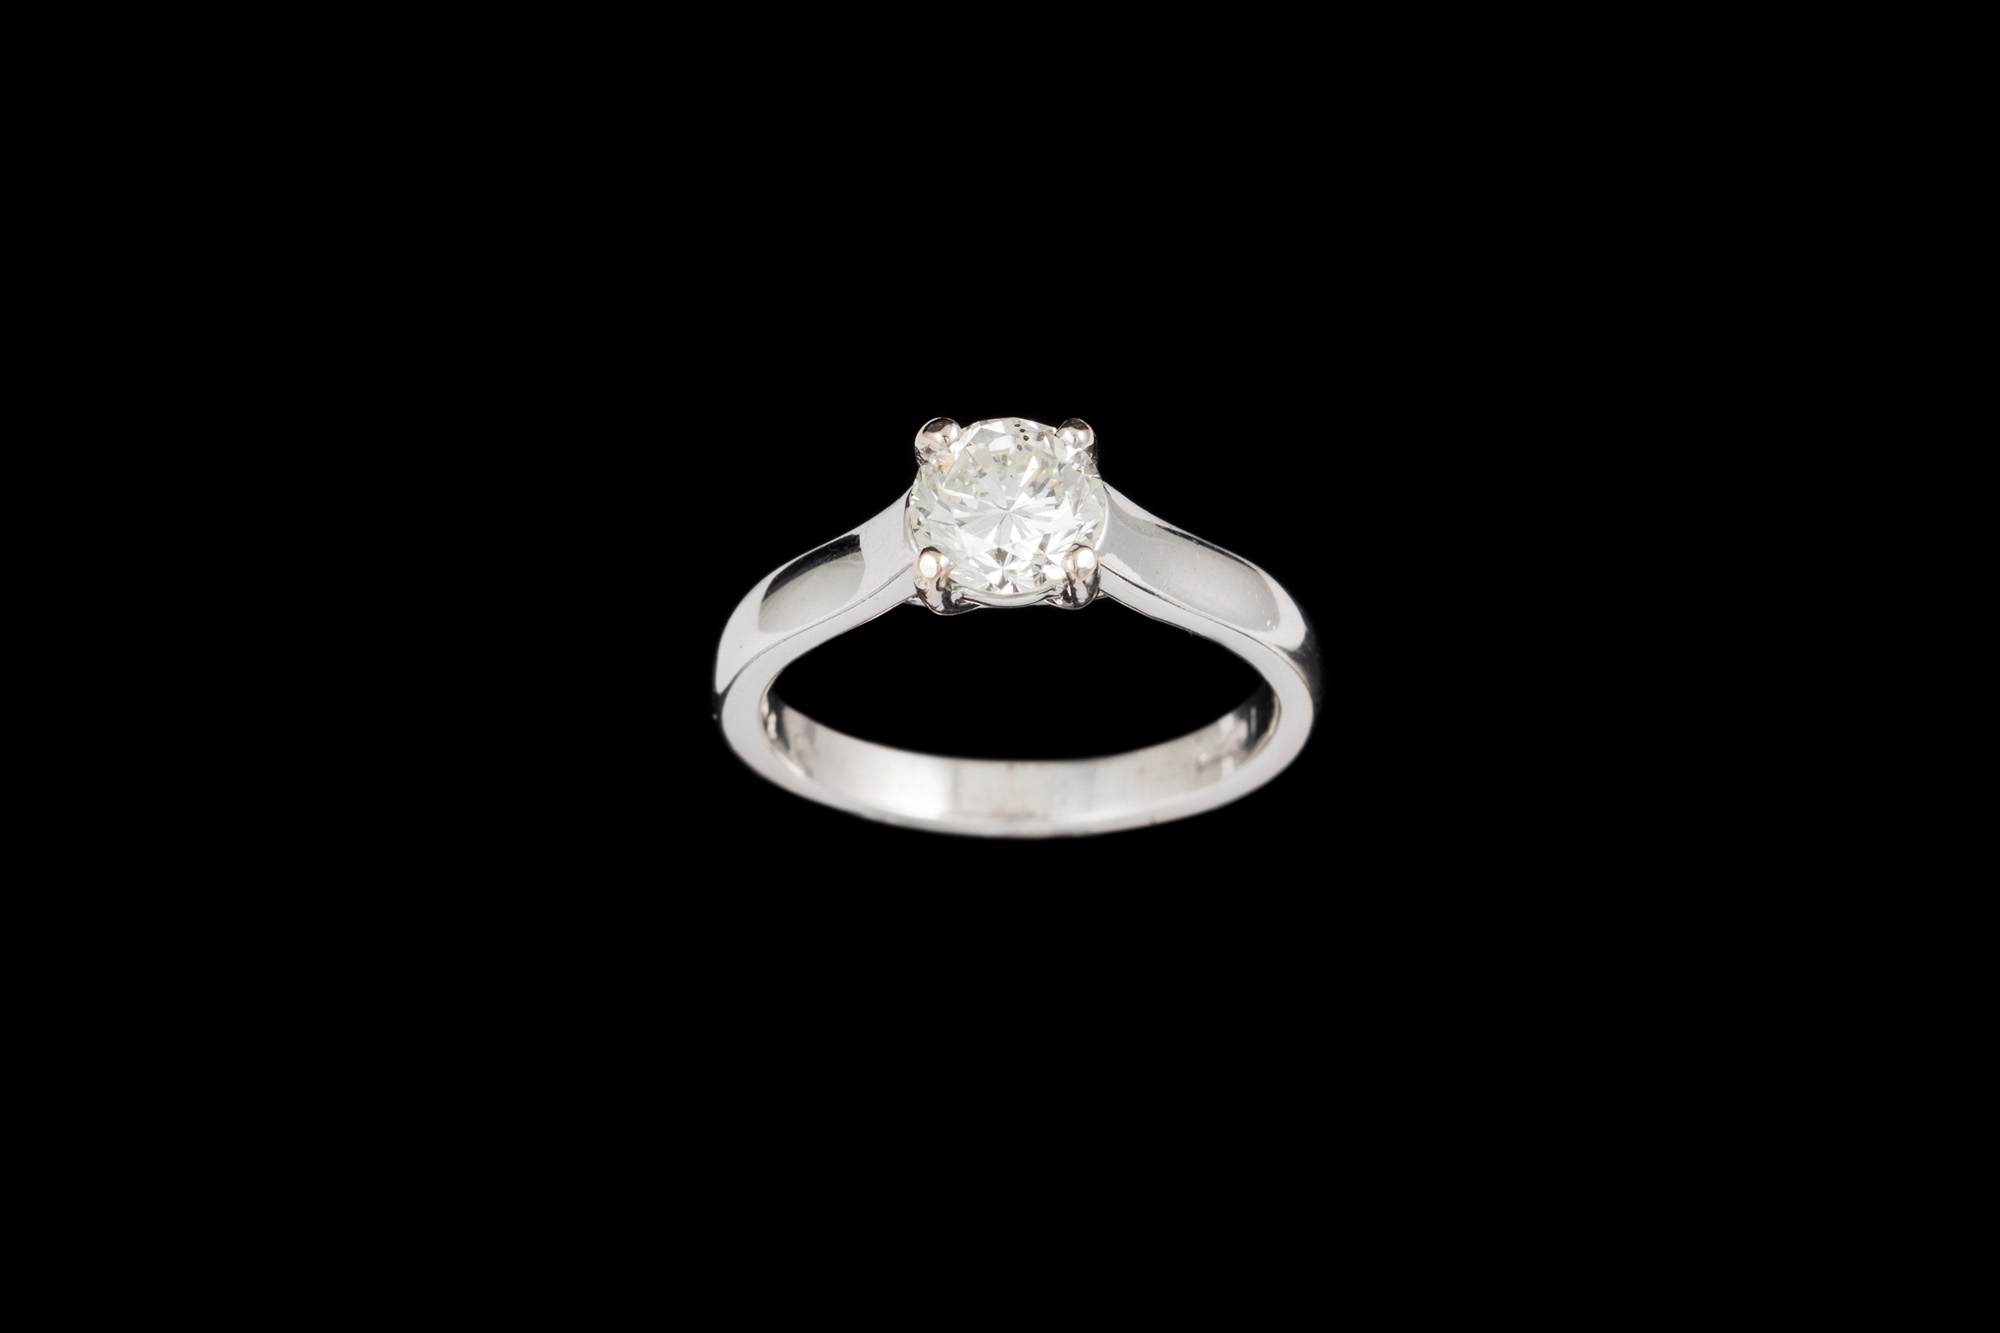 A DIAMOND SOLITAIRE RING, of approx. 1.14ct I SI1, mounted in 18ct white gold